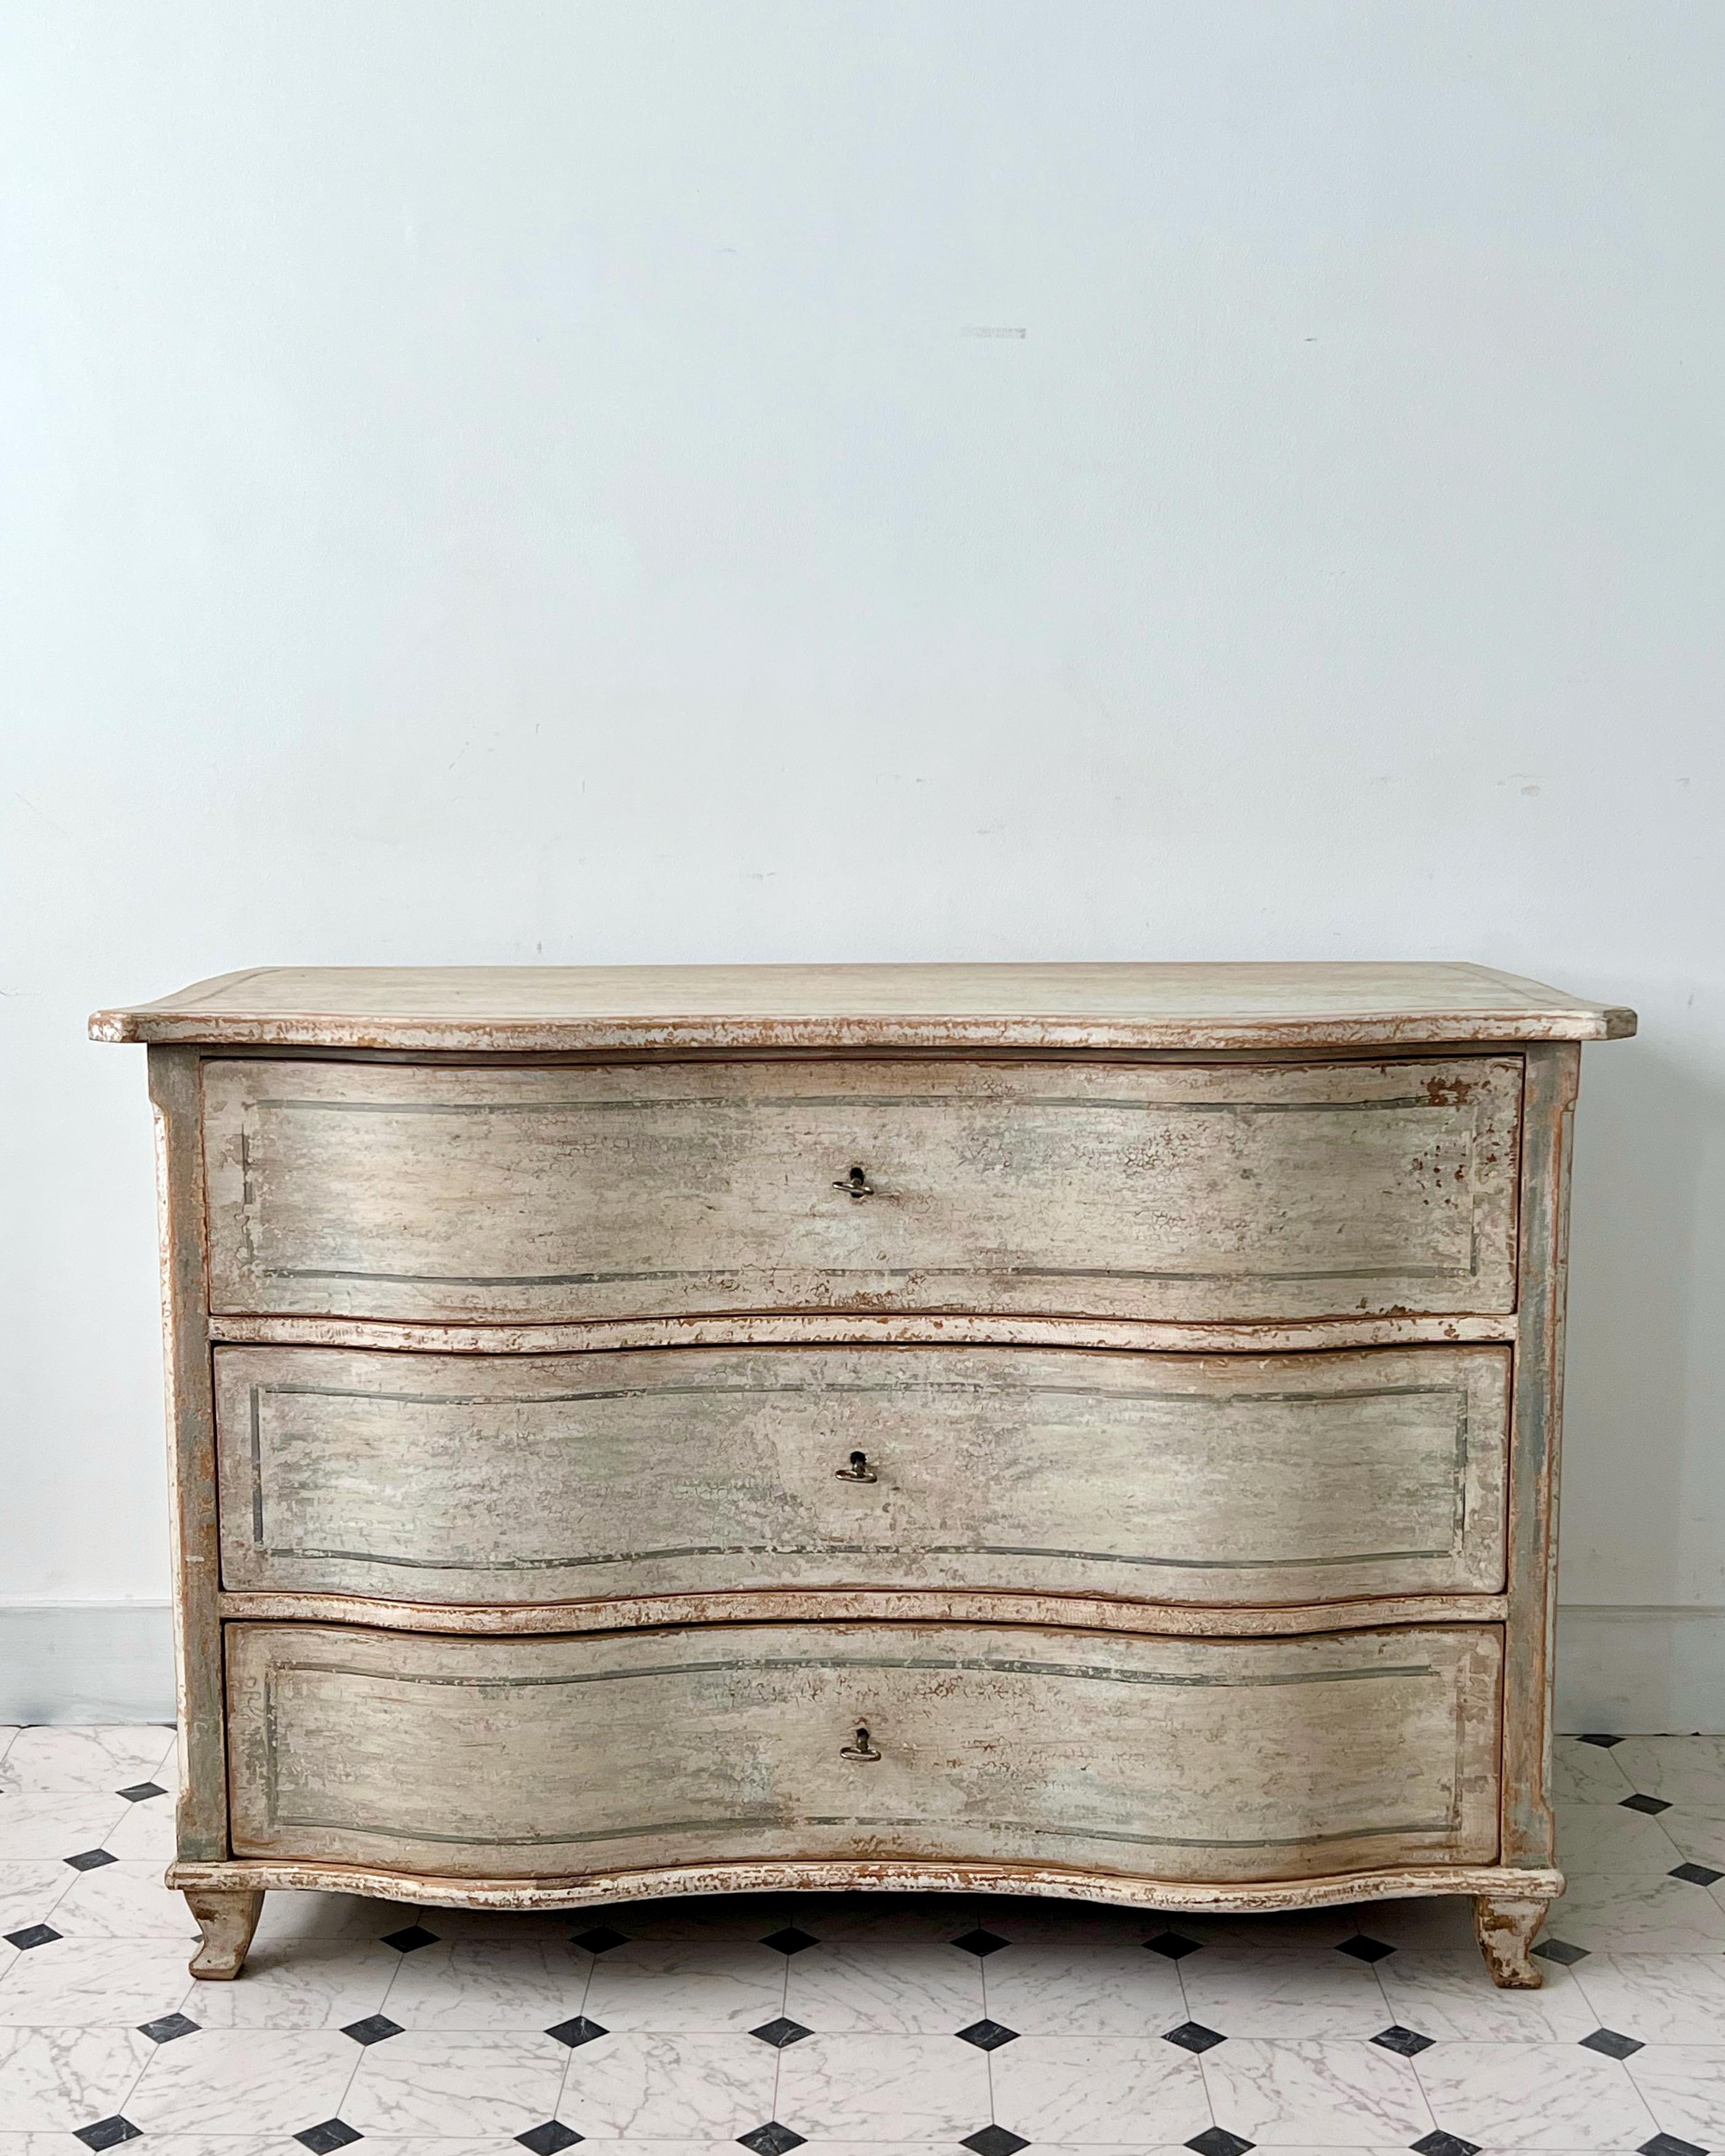 18th century Large chest of drawers from late Baroque period in richly carved curvaceous serpentine drawer fronts, shaped top and carved feet in super later patinated paint.
Germany
More than ever, we selected the best, the rarest, the unusual,